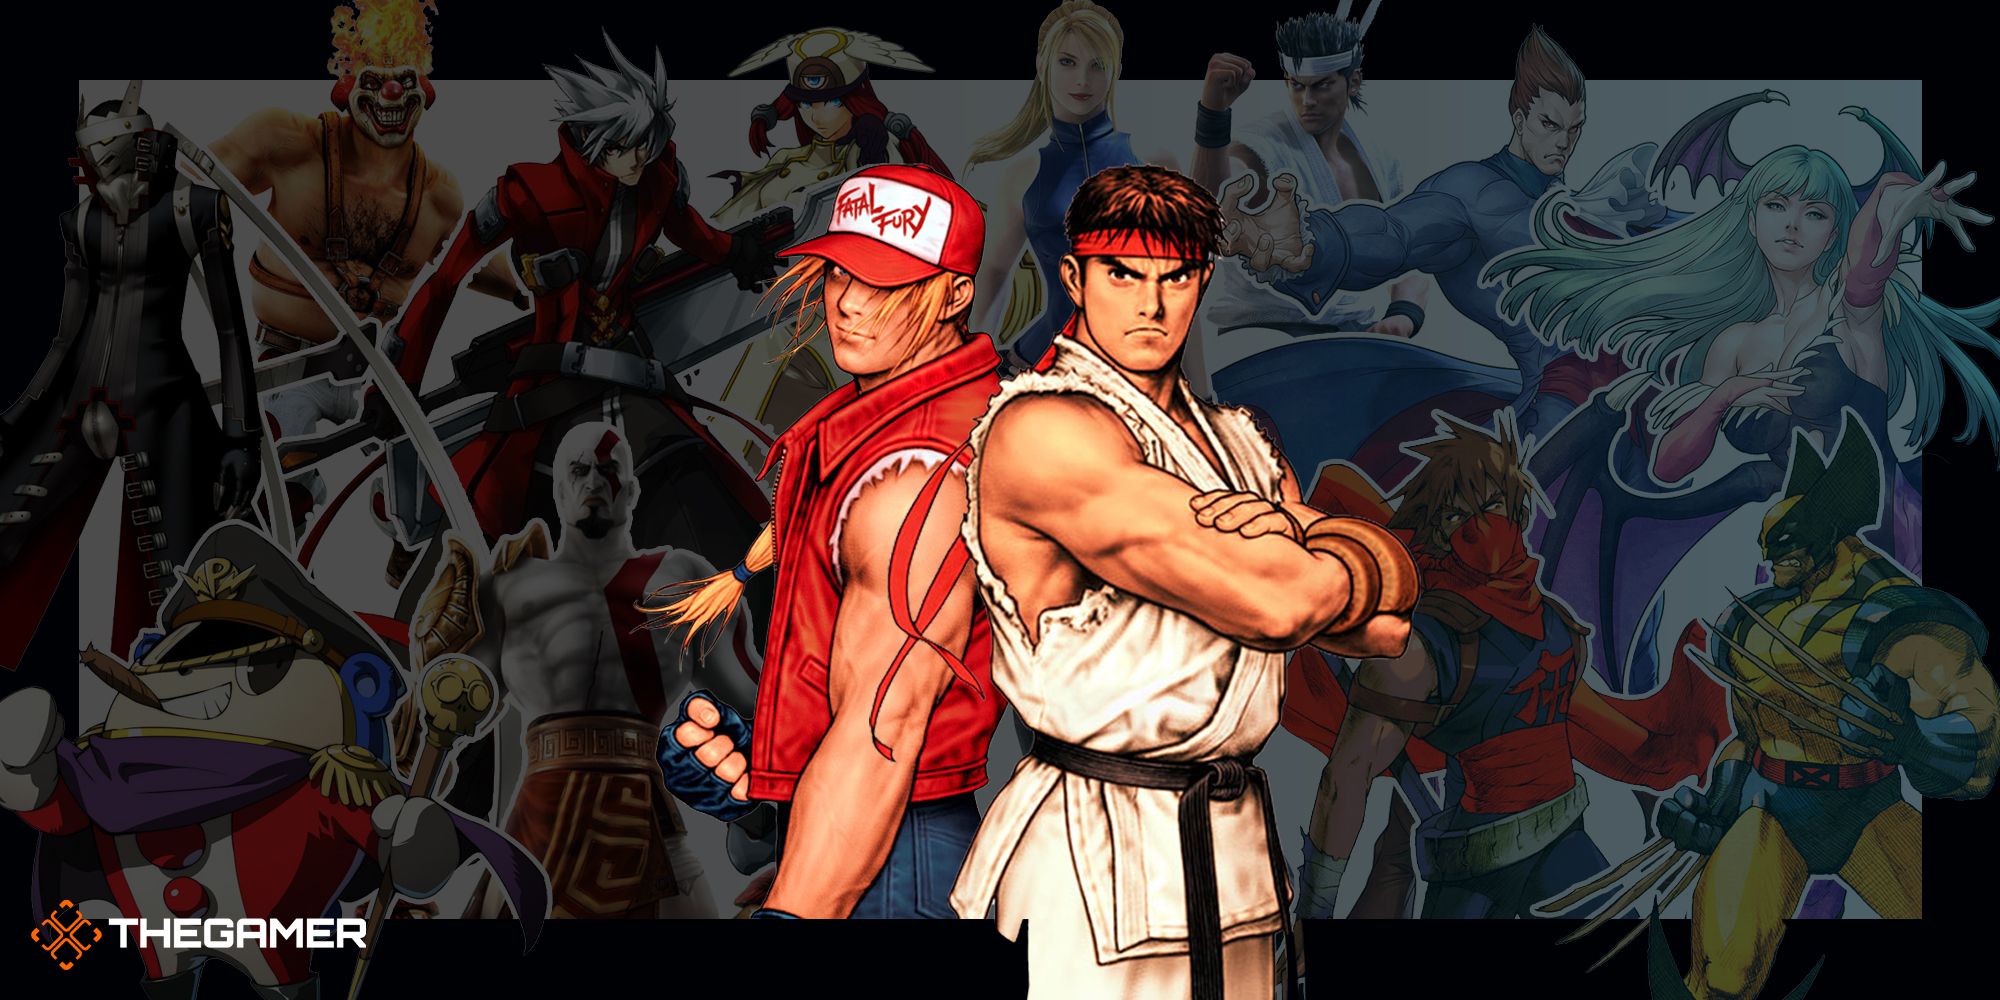 10 STREET FIGHTERS VS 10 KING OF FIGHTERS! 